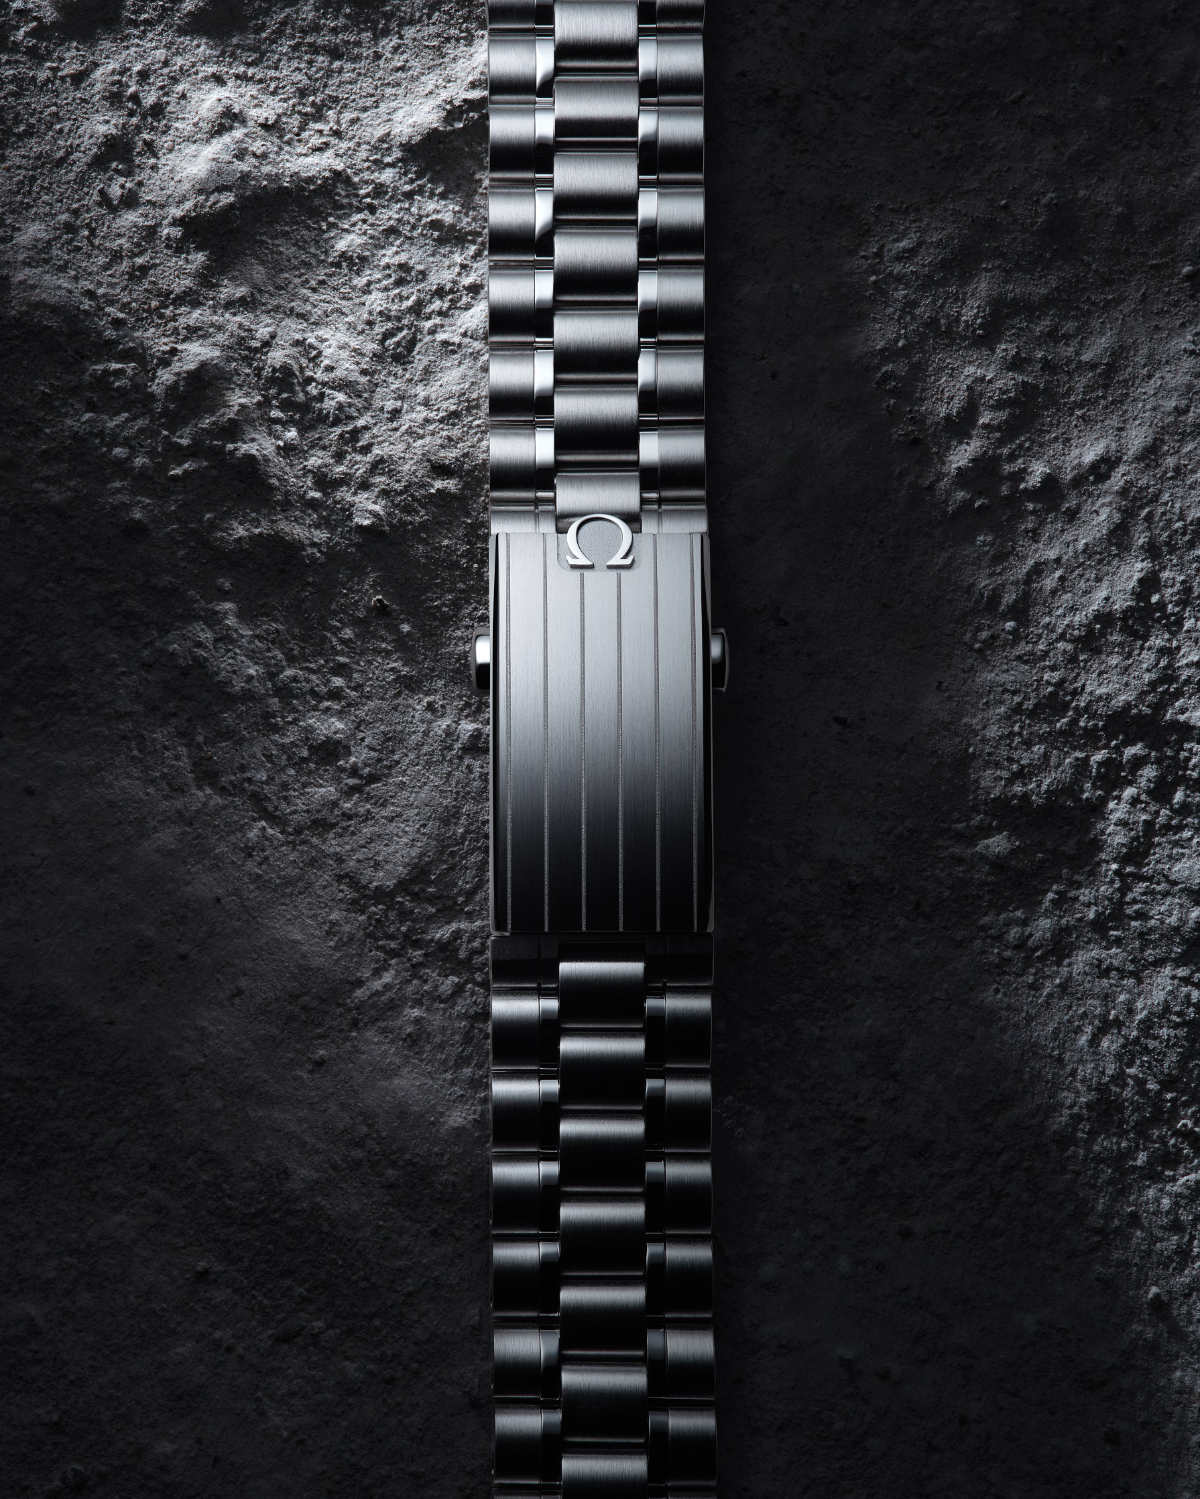 OMEGA: Moonwatch now Master Chronometer Certified